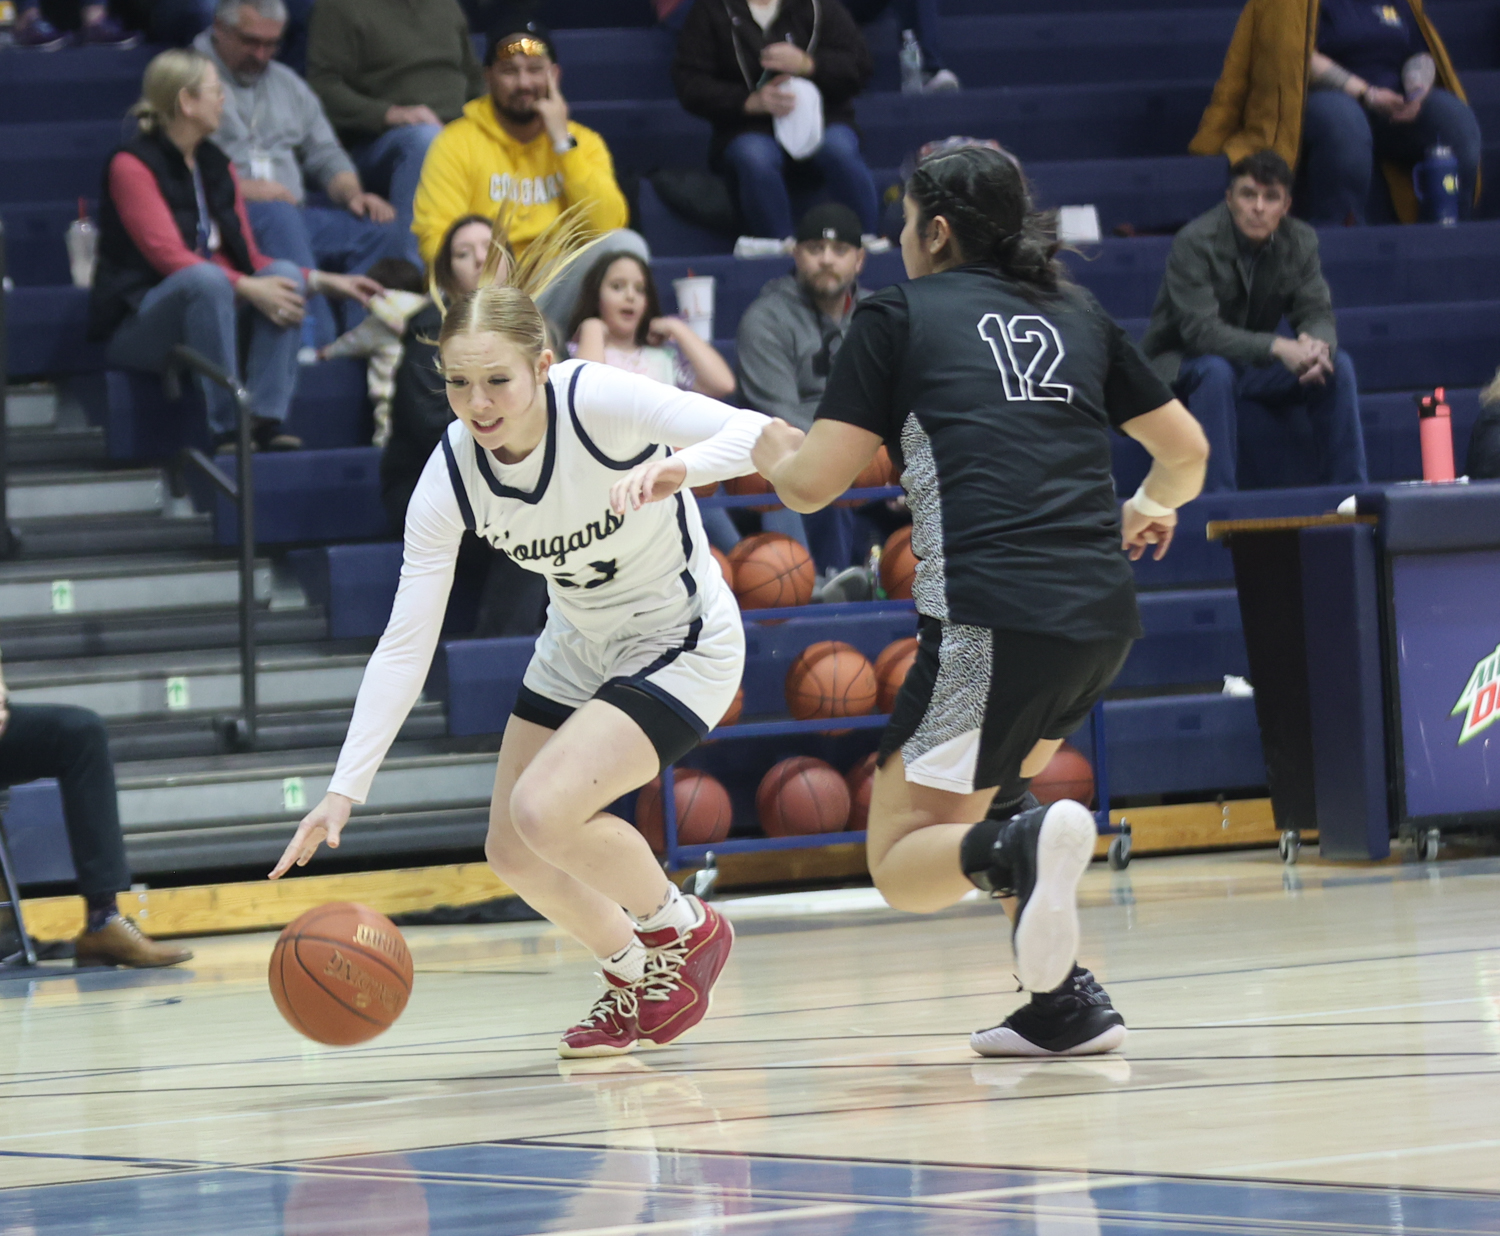 Kiley Smich dribbles to the basket in a first-round playoff game against Trinidad State.